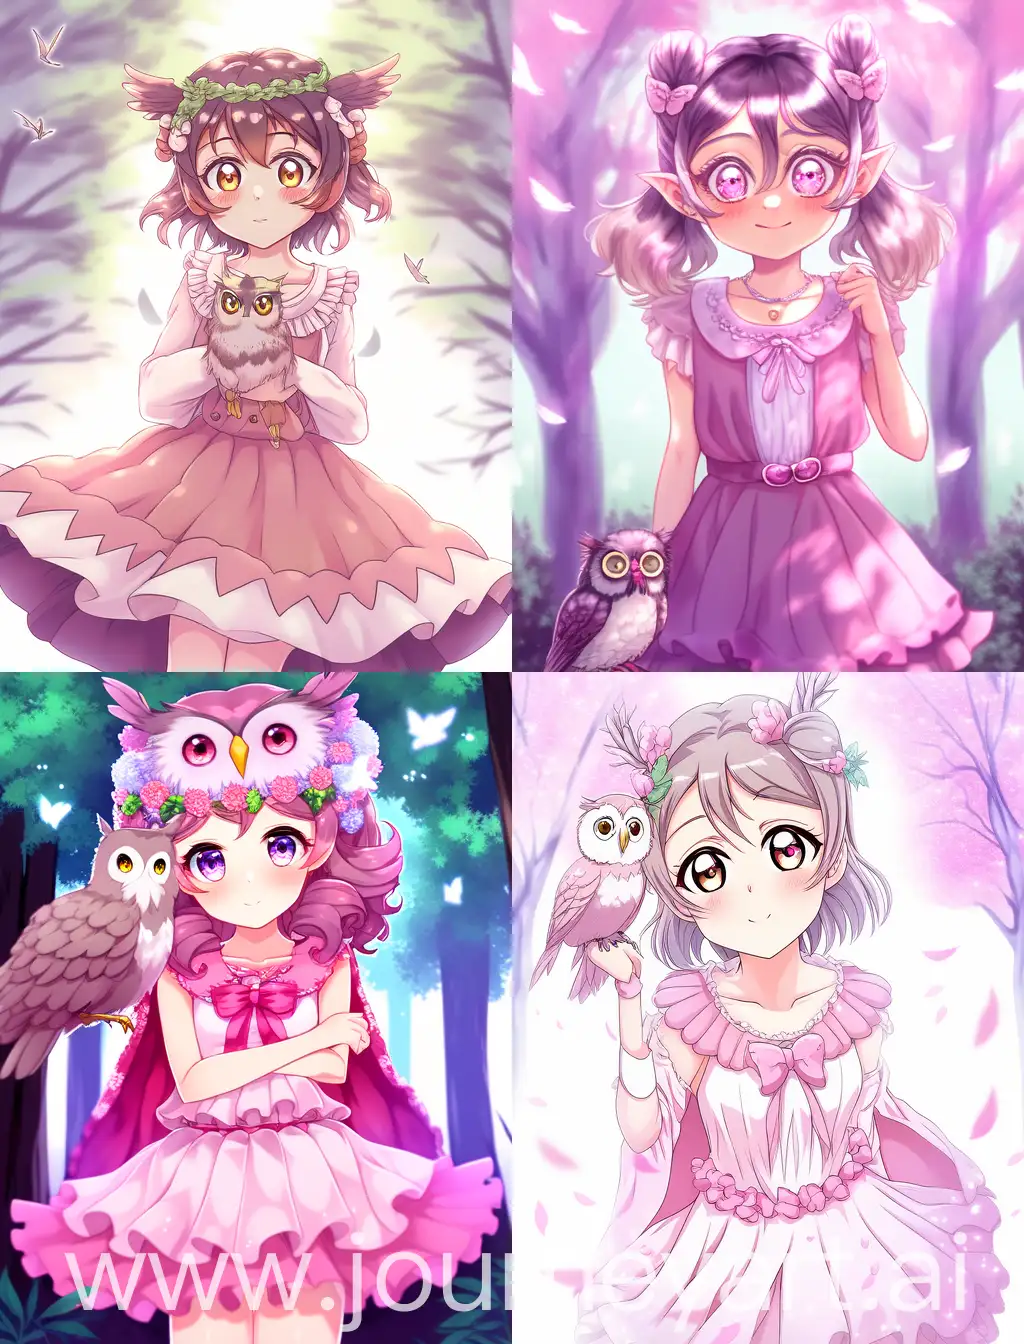 anime girl with a pretty face, big eyes and small Great Horned Owl tufts. She is wearing a pink party dress with a ruffled collar 